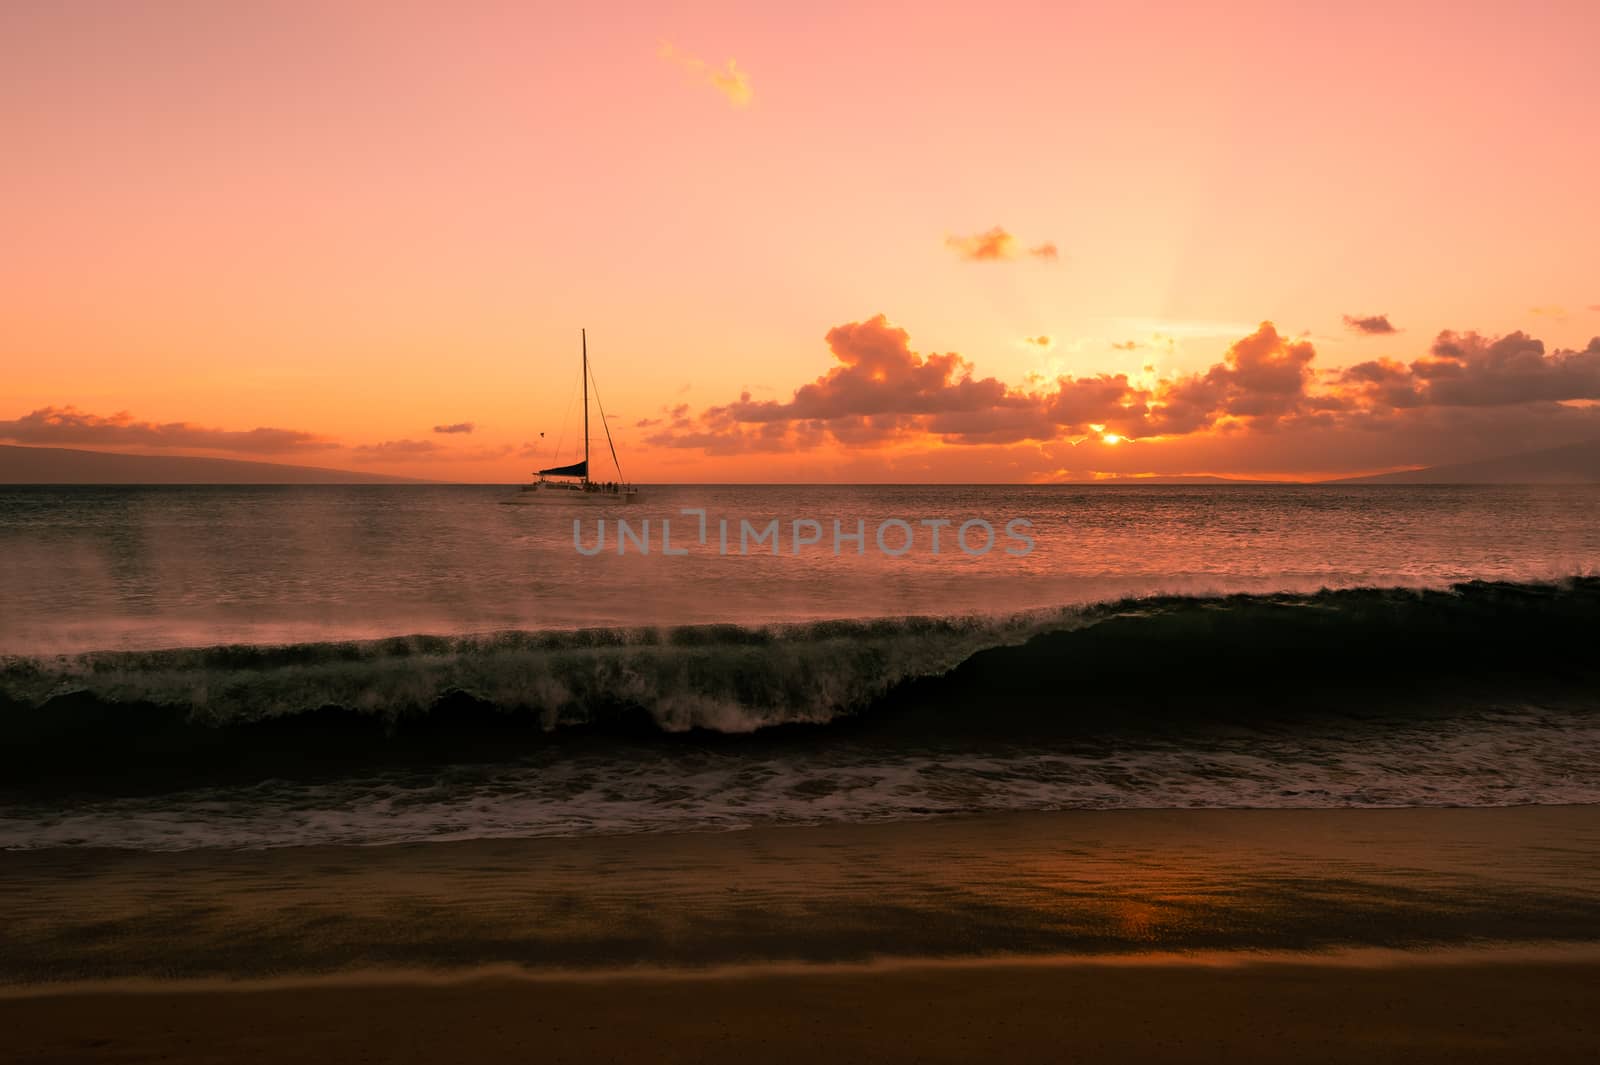 Sailboat on the ocean with wave at sunset by chentim